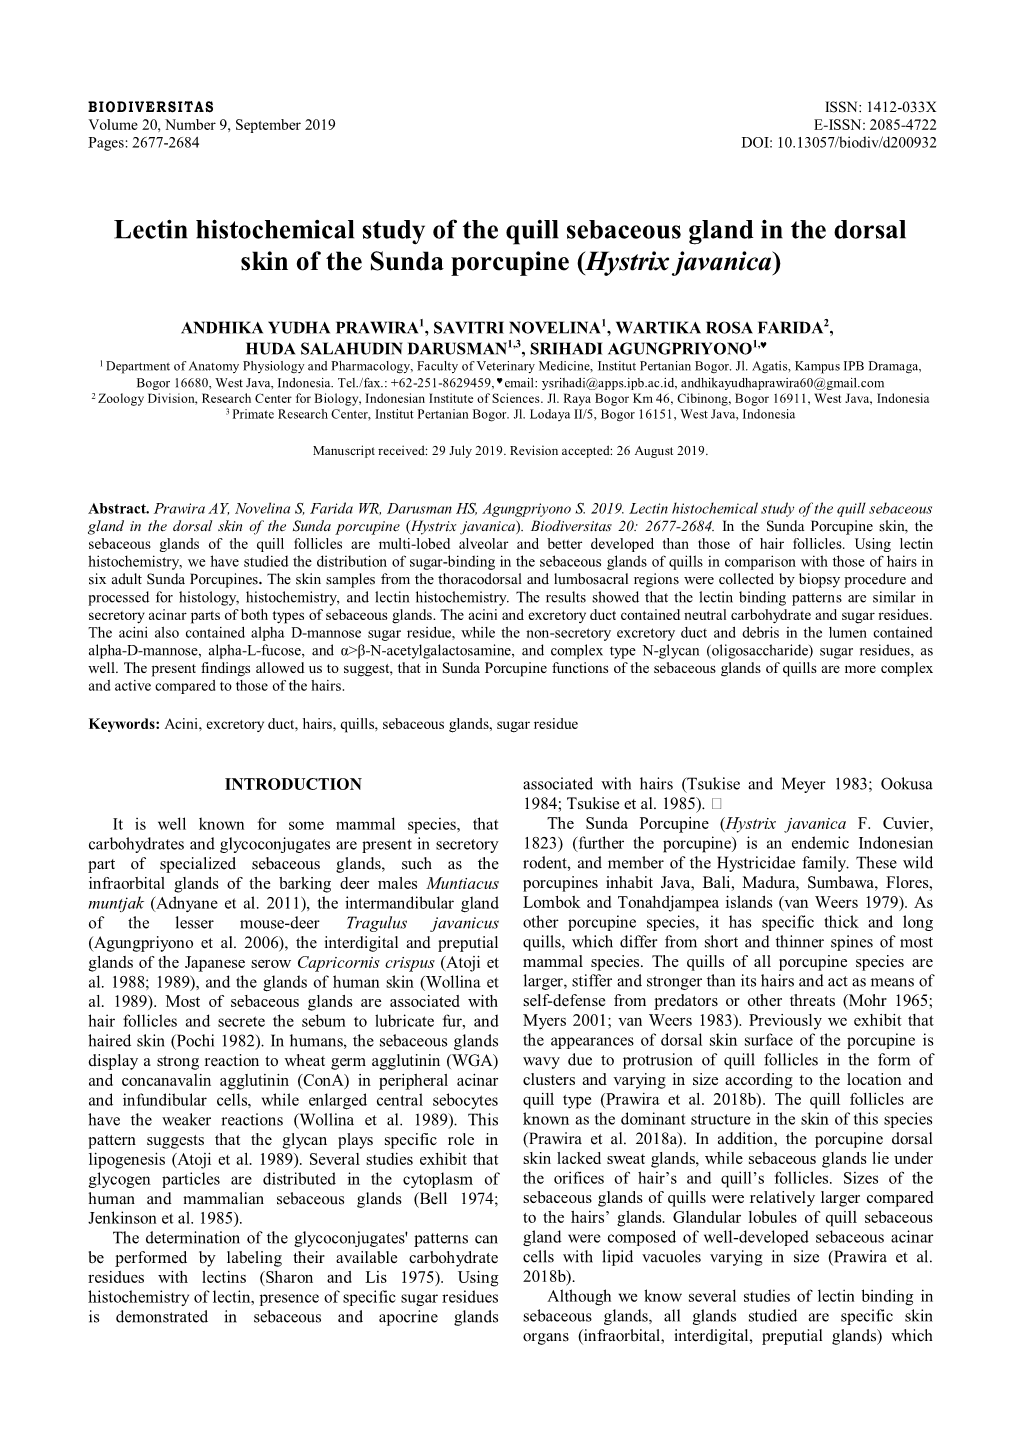 Lectin Histochemical Study of the Quill Sebaceous Gland in the Dorsal Skin of the Sunda Porcupine (Hystrix Javanica)